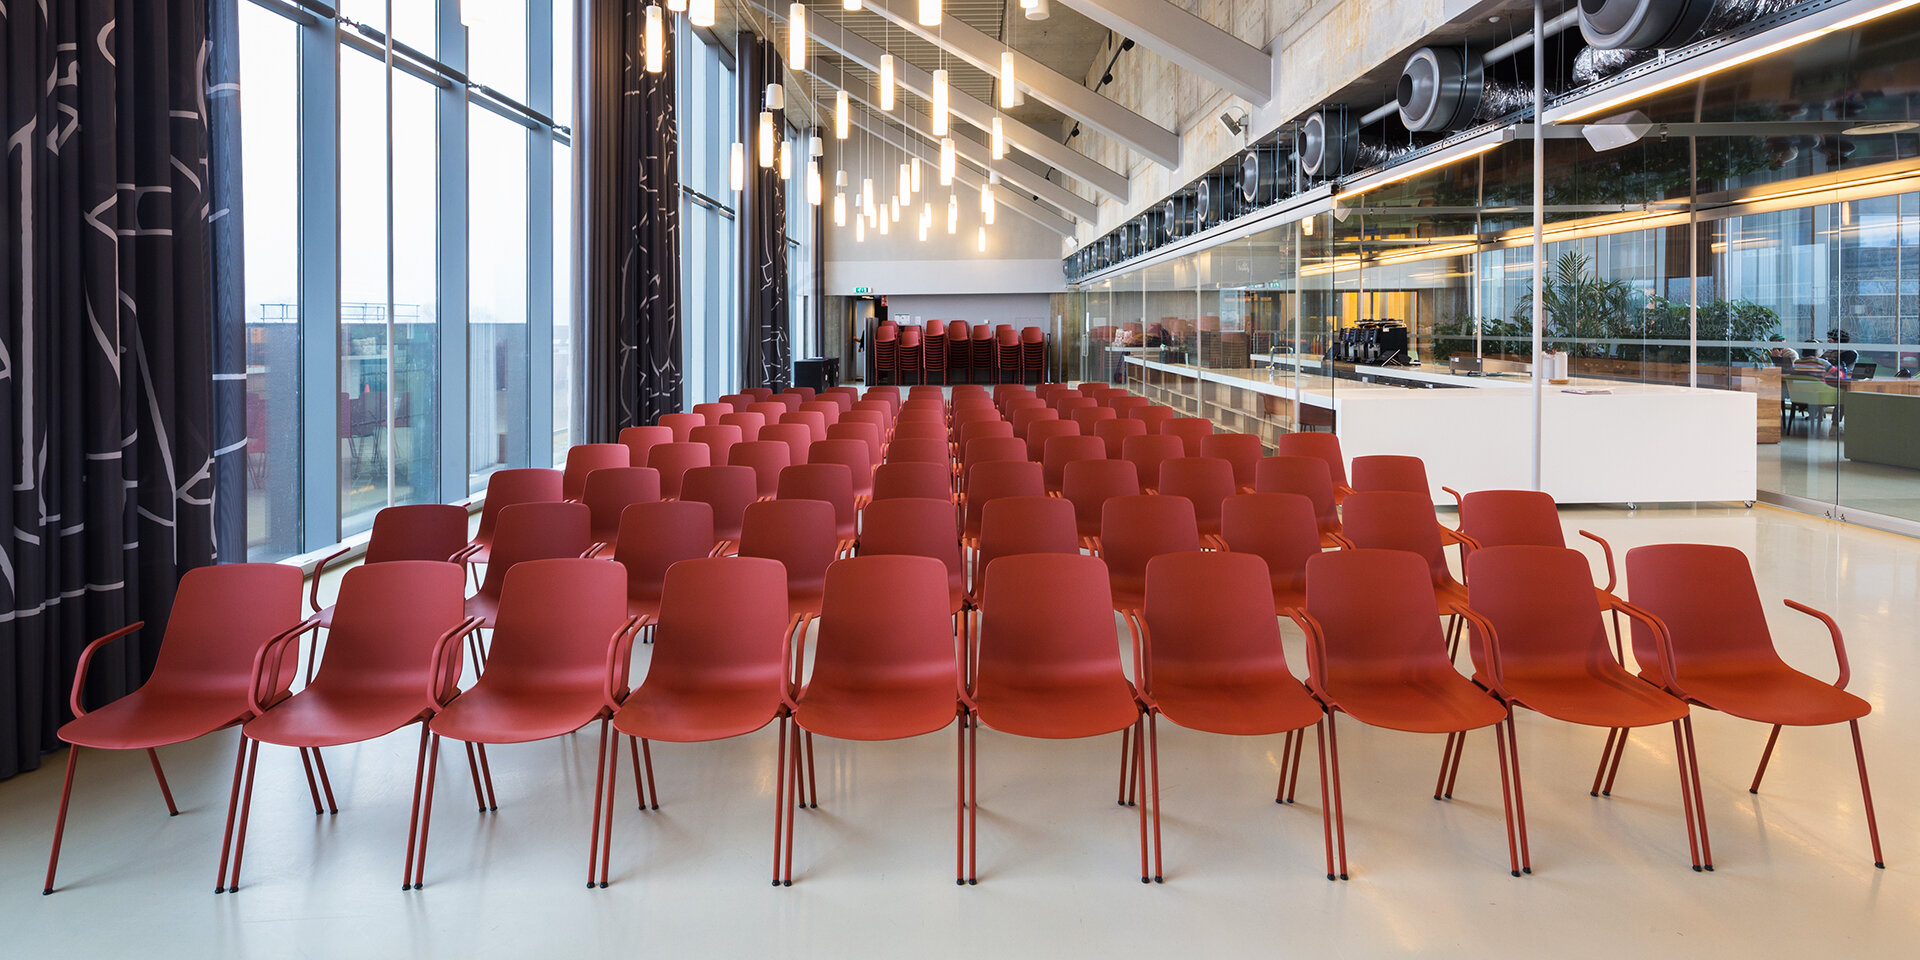 Rows of red chairs. | © Etienne Oldeman Photography